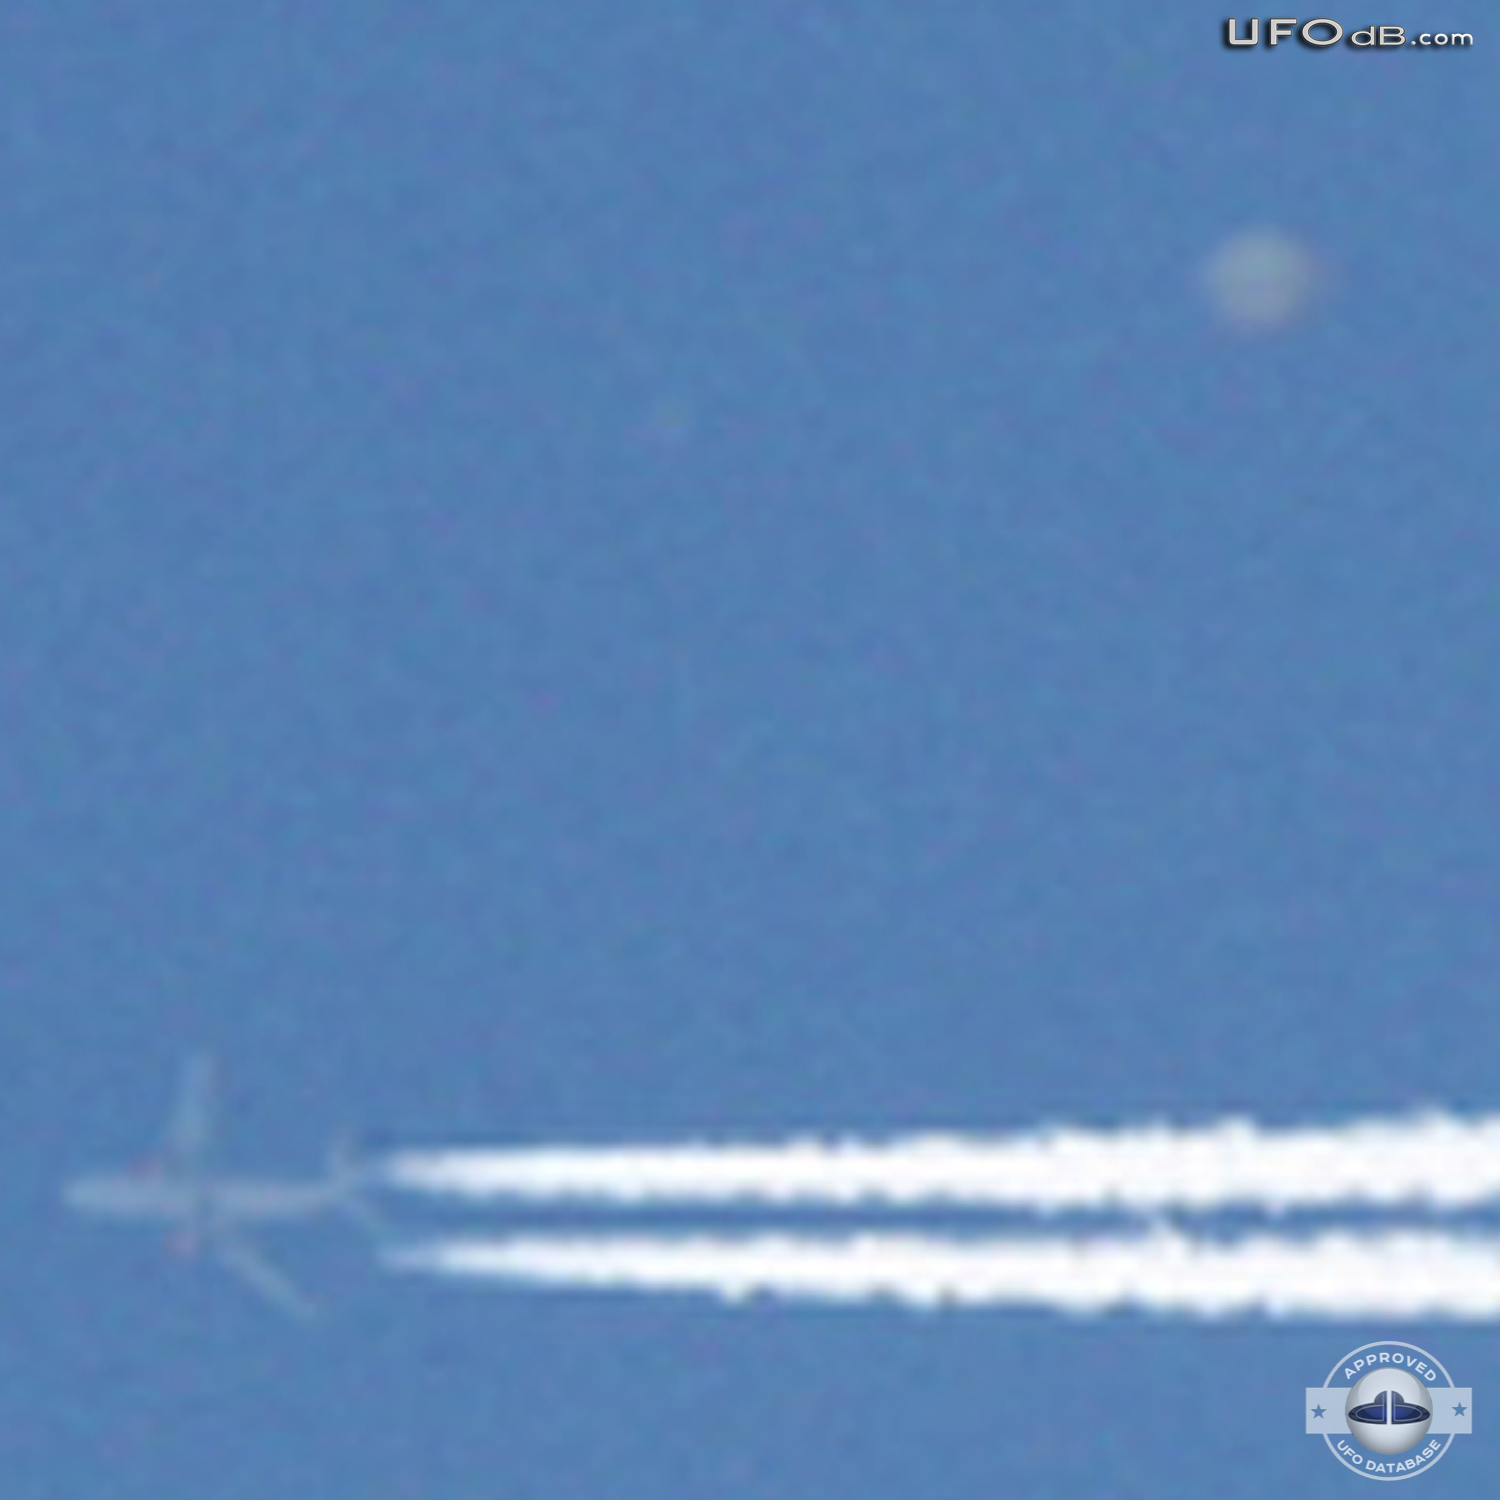 High Altitude UFO near airplane caught on picture Norwich UK May 2011 UFO Picture #309-4